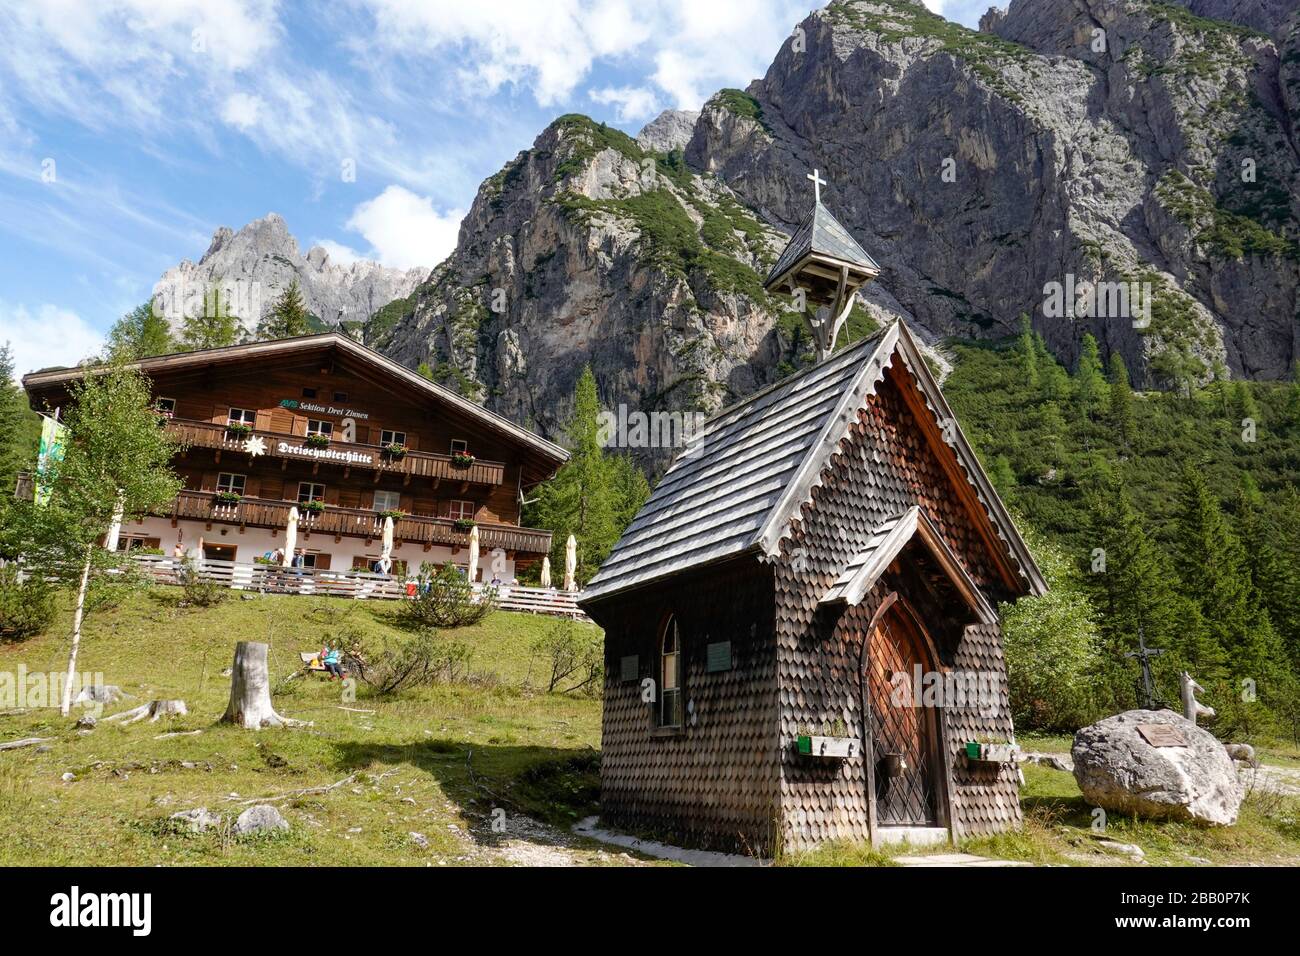 Drei Schuster Hutte in the Dolomites, Italy. Stock Photo